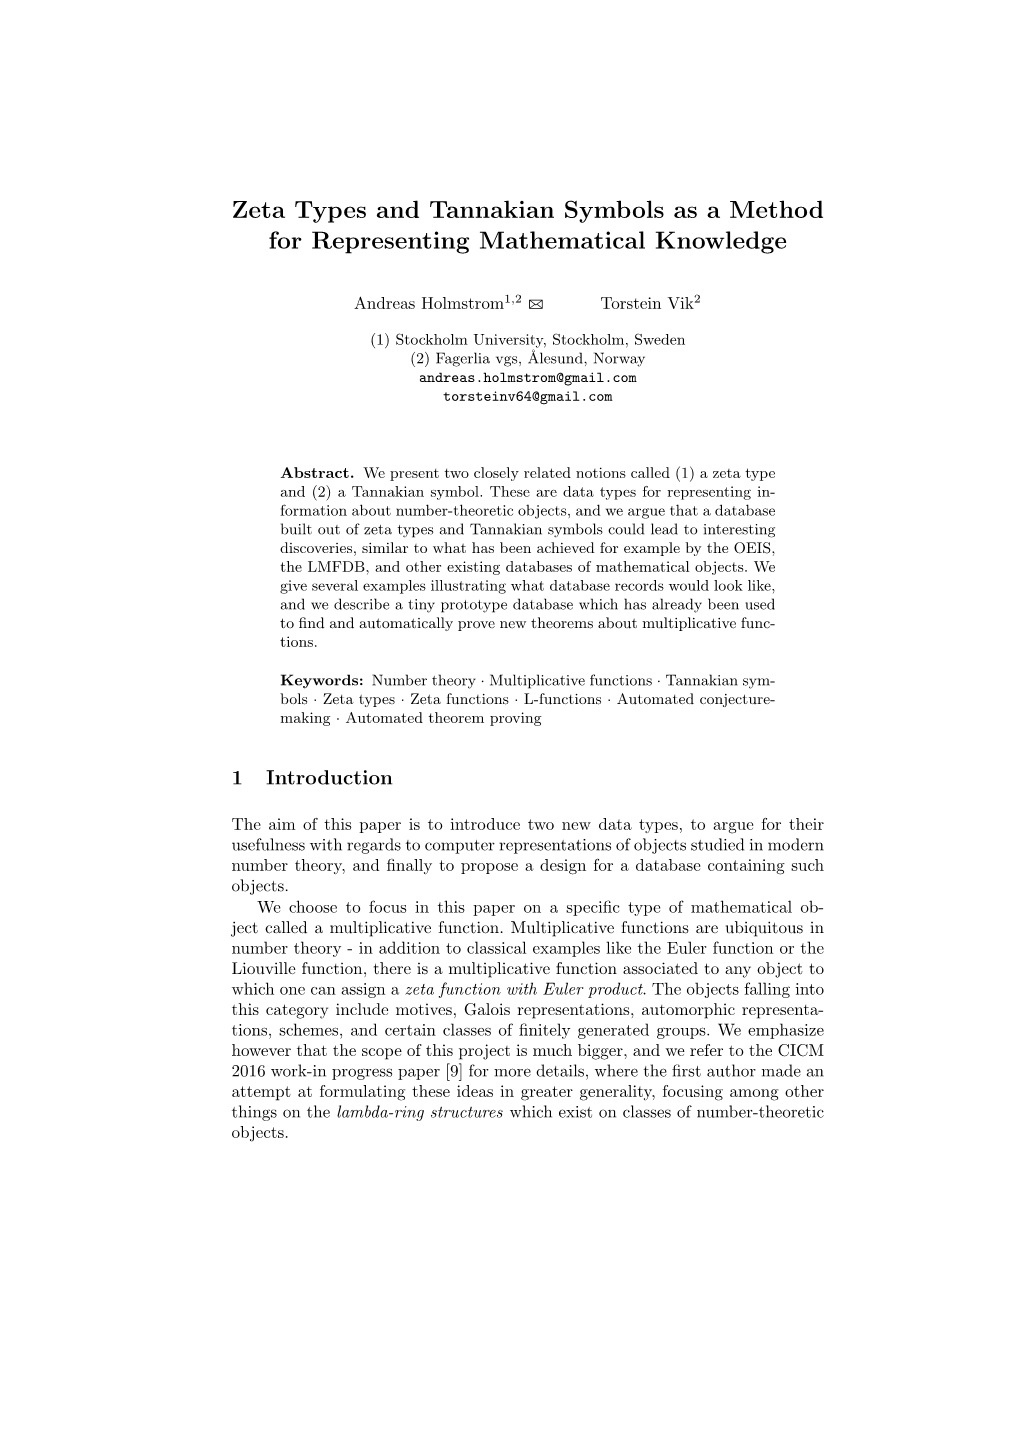 Zeta Types and Tannakian Symbols As a Method for Representing Mathematical Knowledge